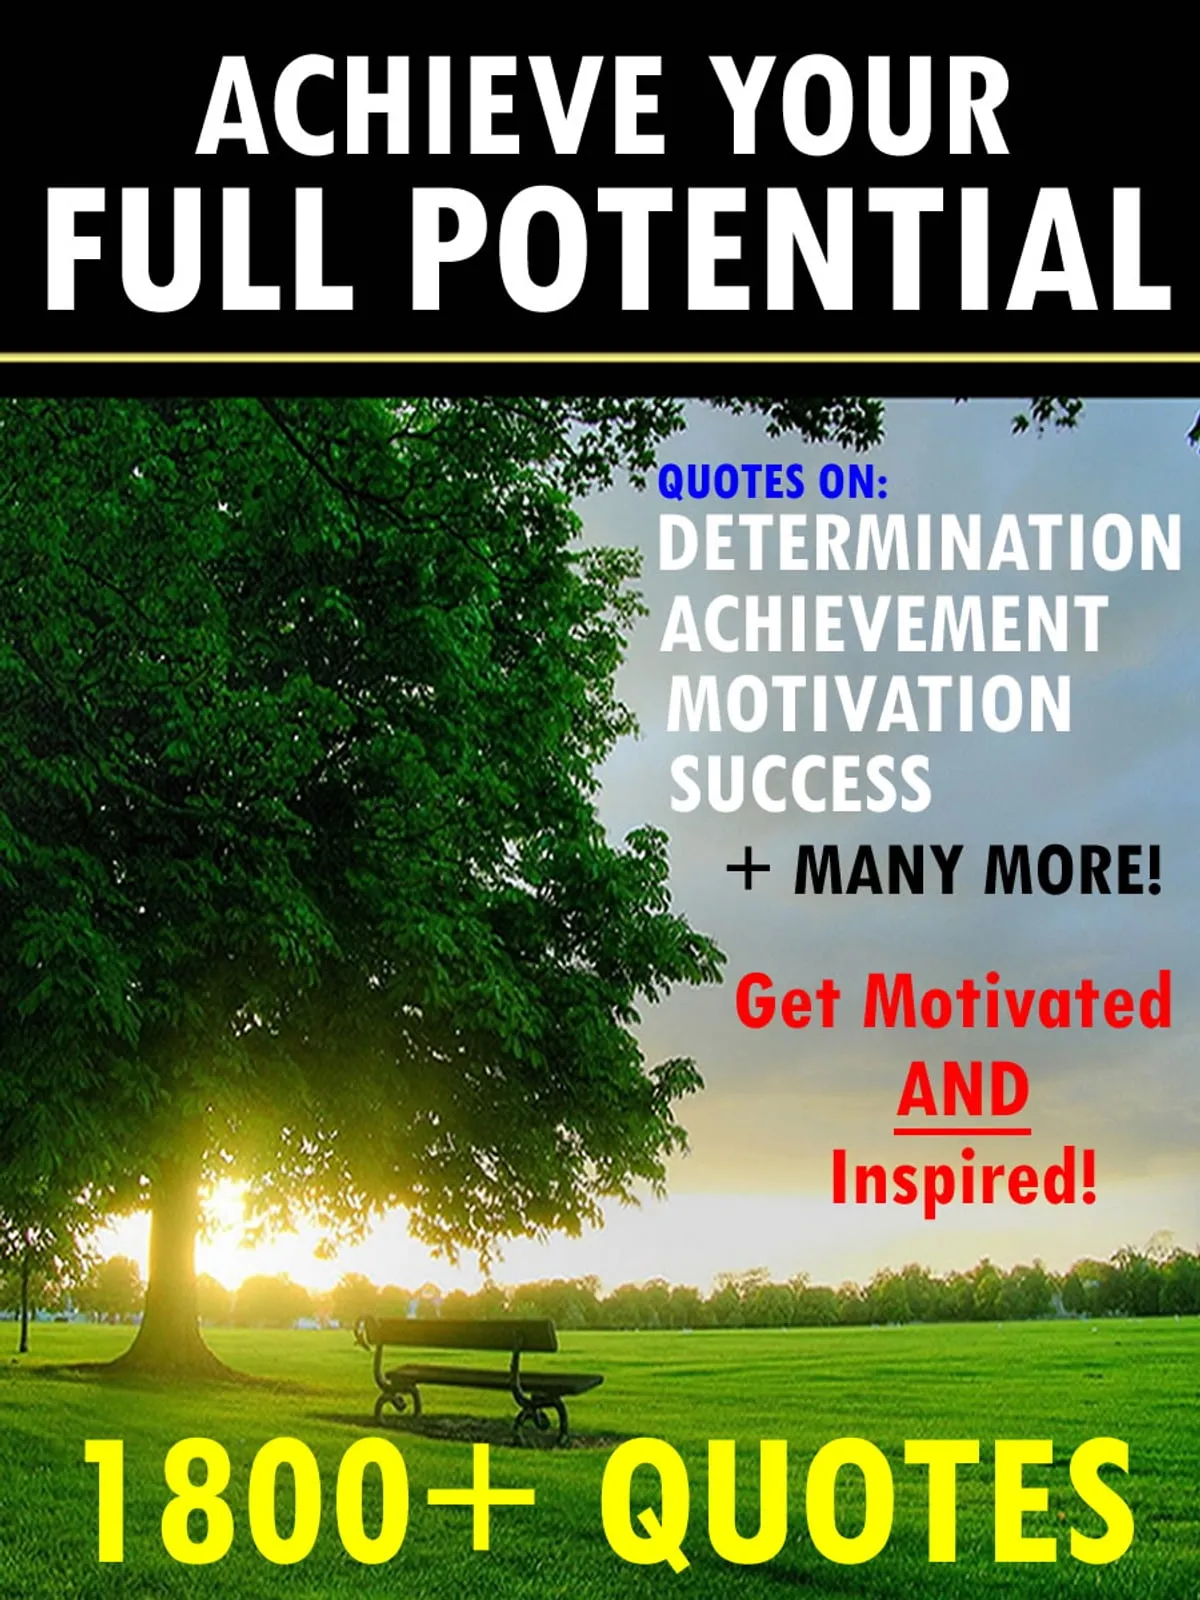 Achieve Your Full Potential 1800 Inspirational Quotes That Will Change Your Life (Change Your Life Publishing)